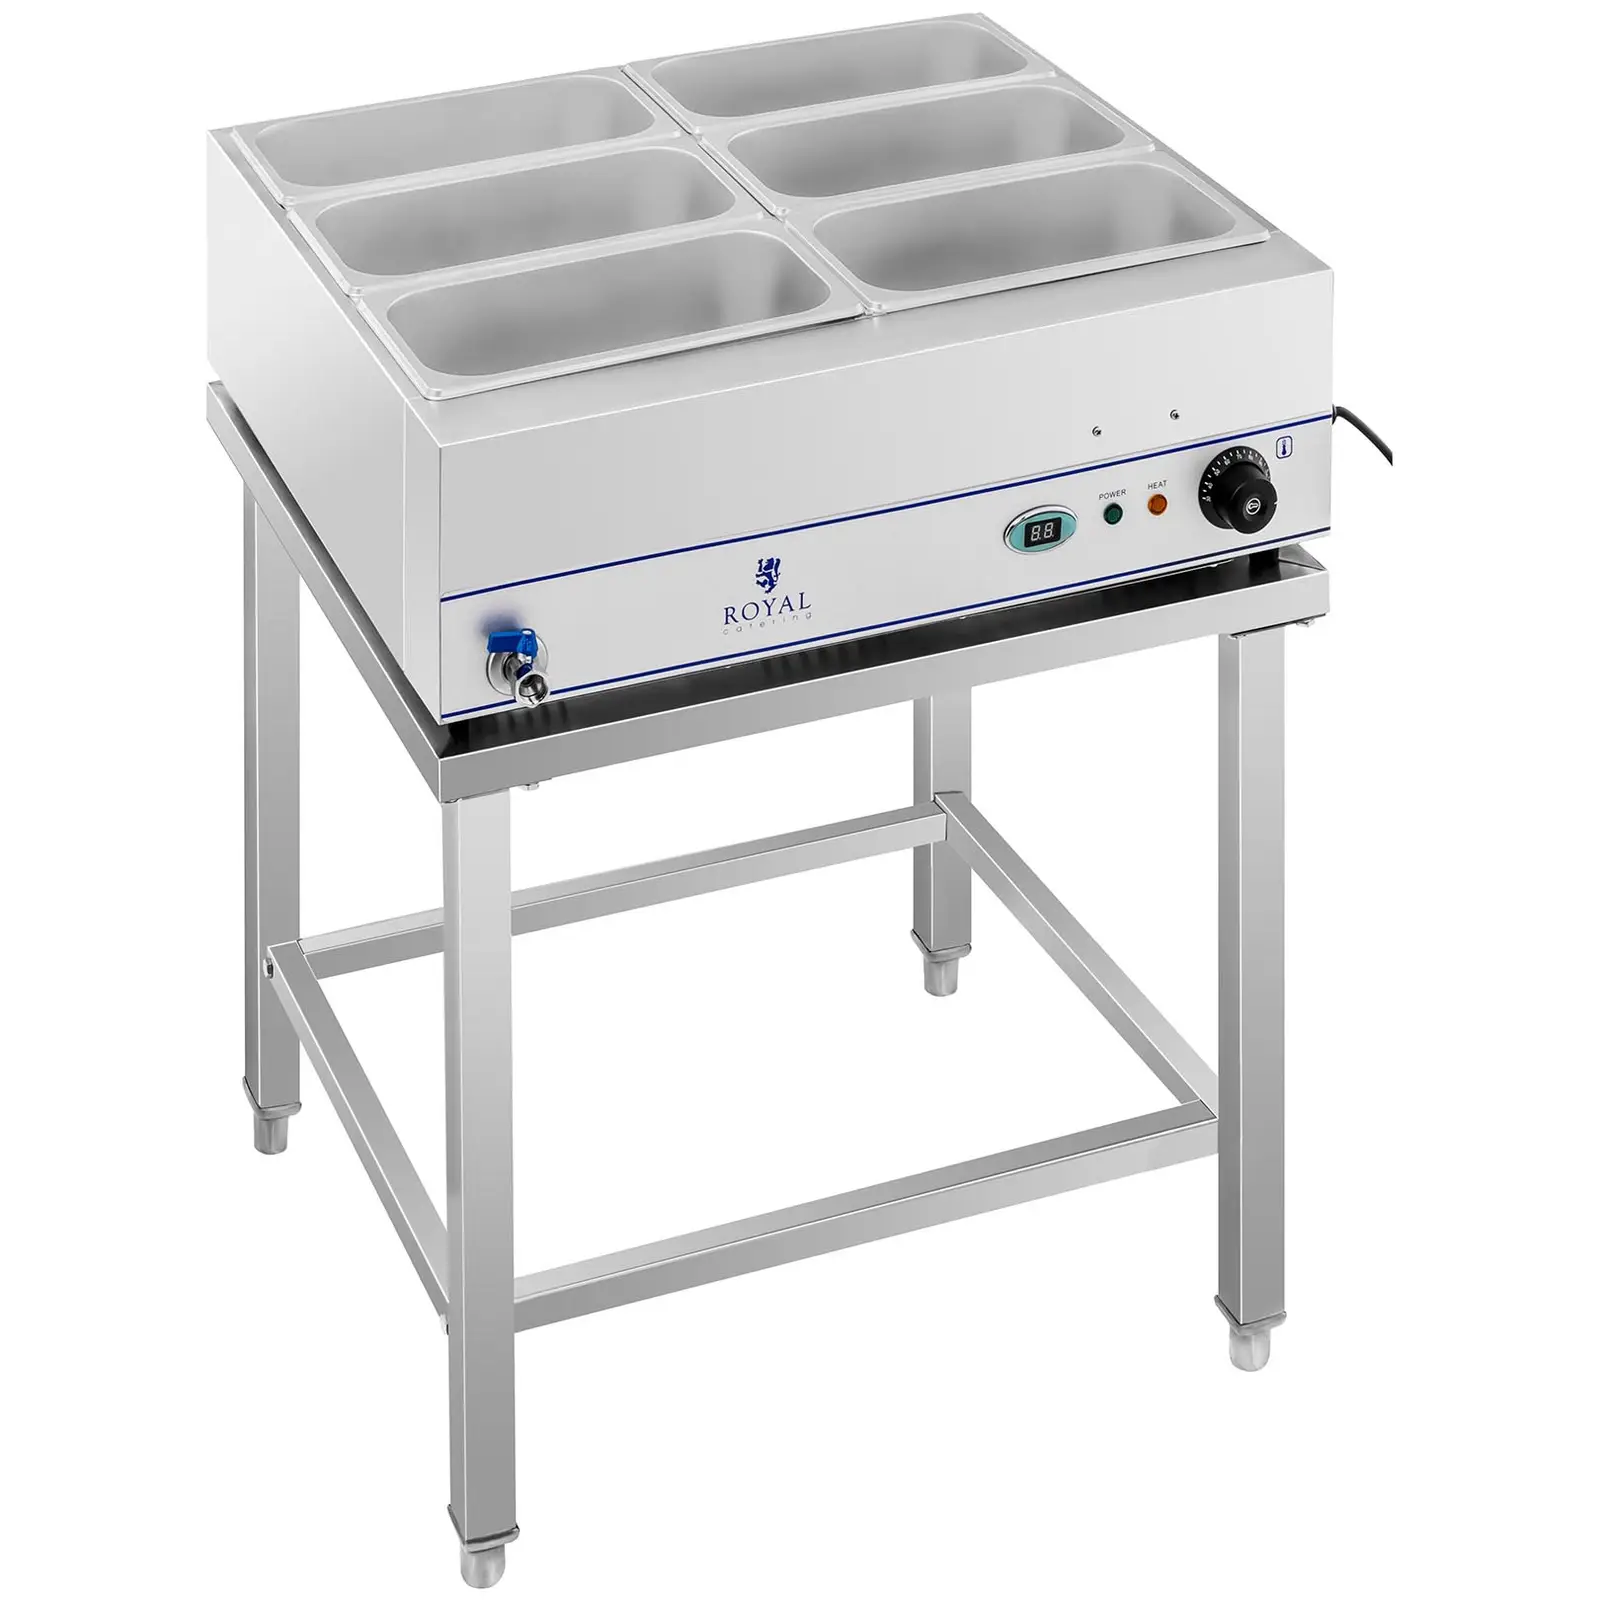 Bain-Marie - 2,000 W - 6 x 1/3 GN containers - with base and drain tap